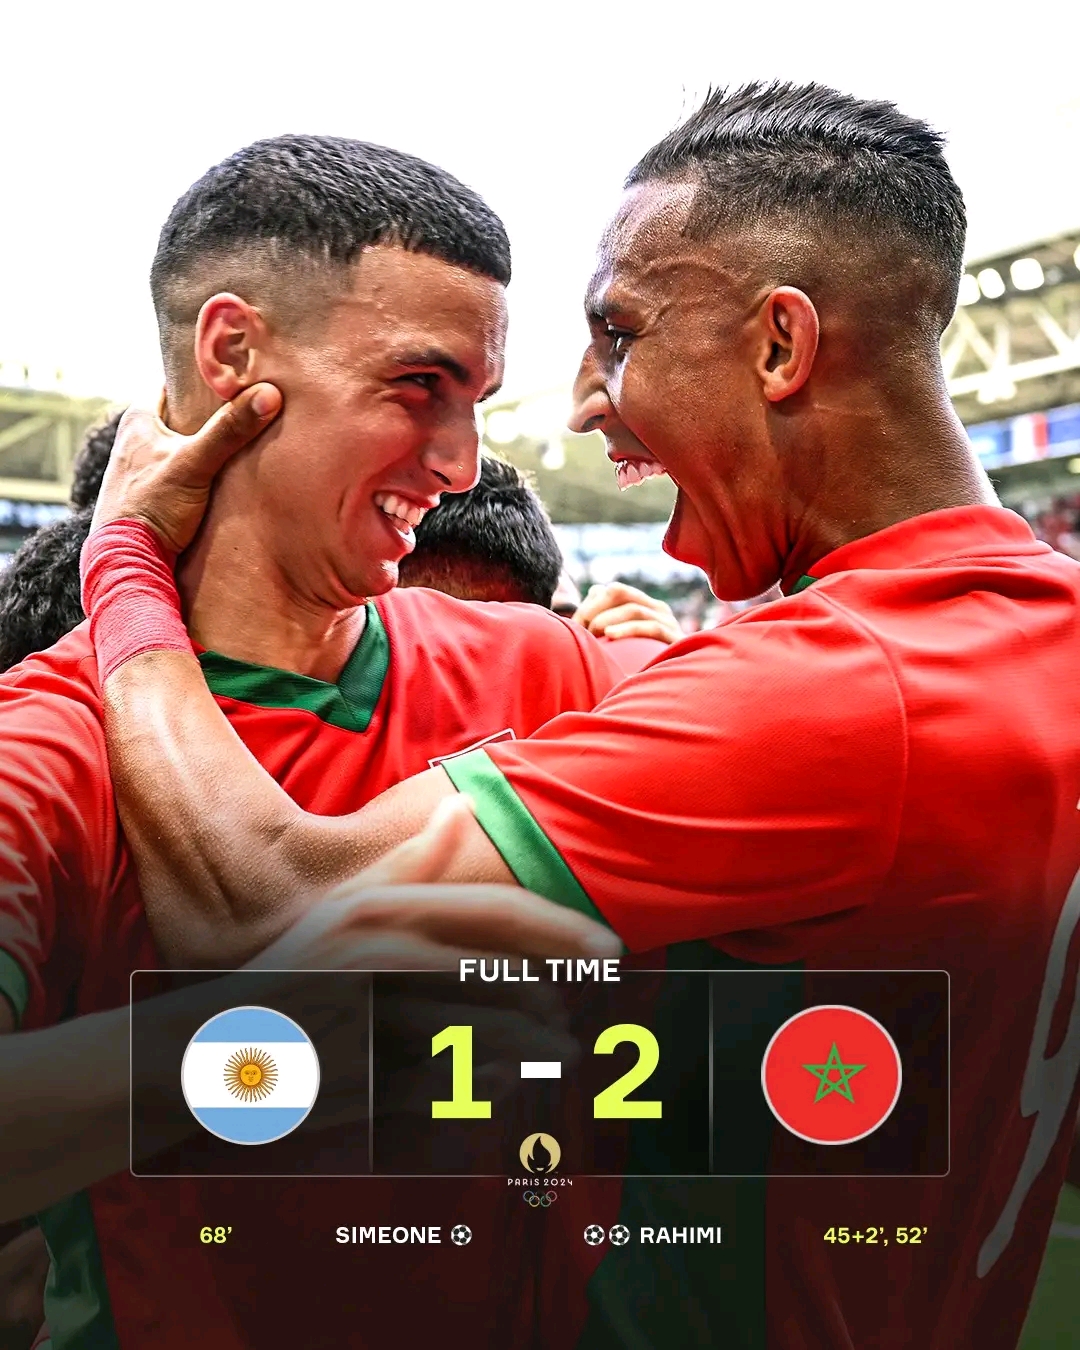 Morocco Defeats World Champions Argentina In Controversial Olympic Football Opener